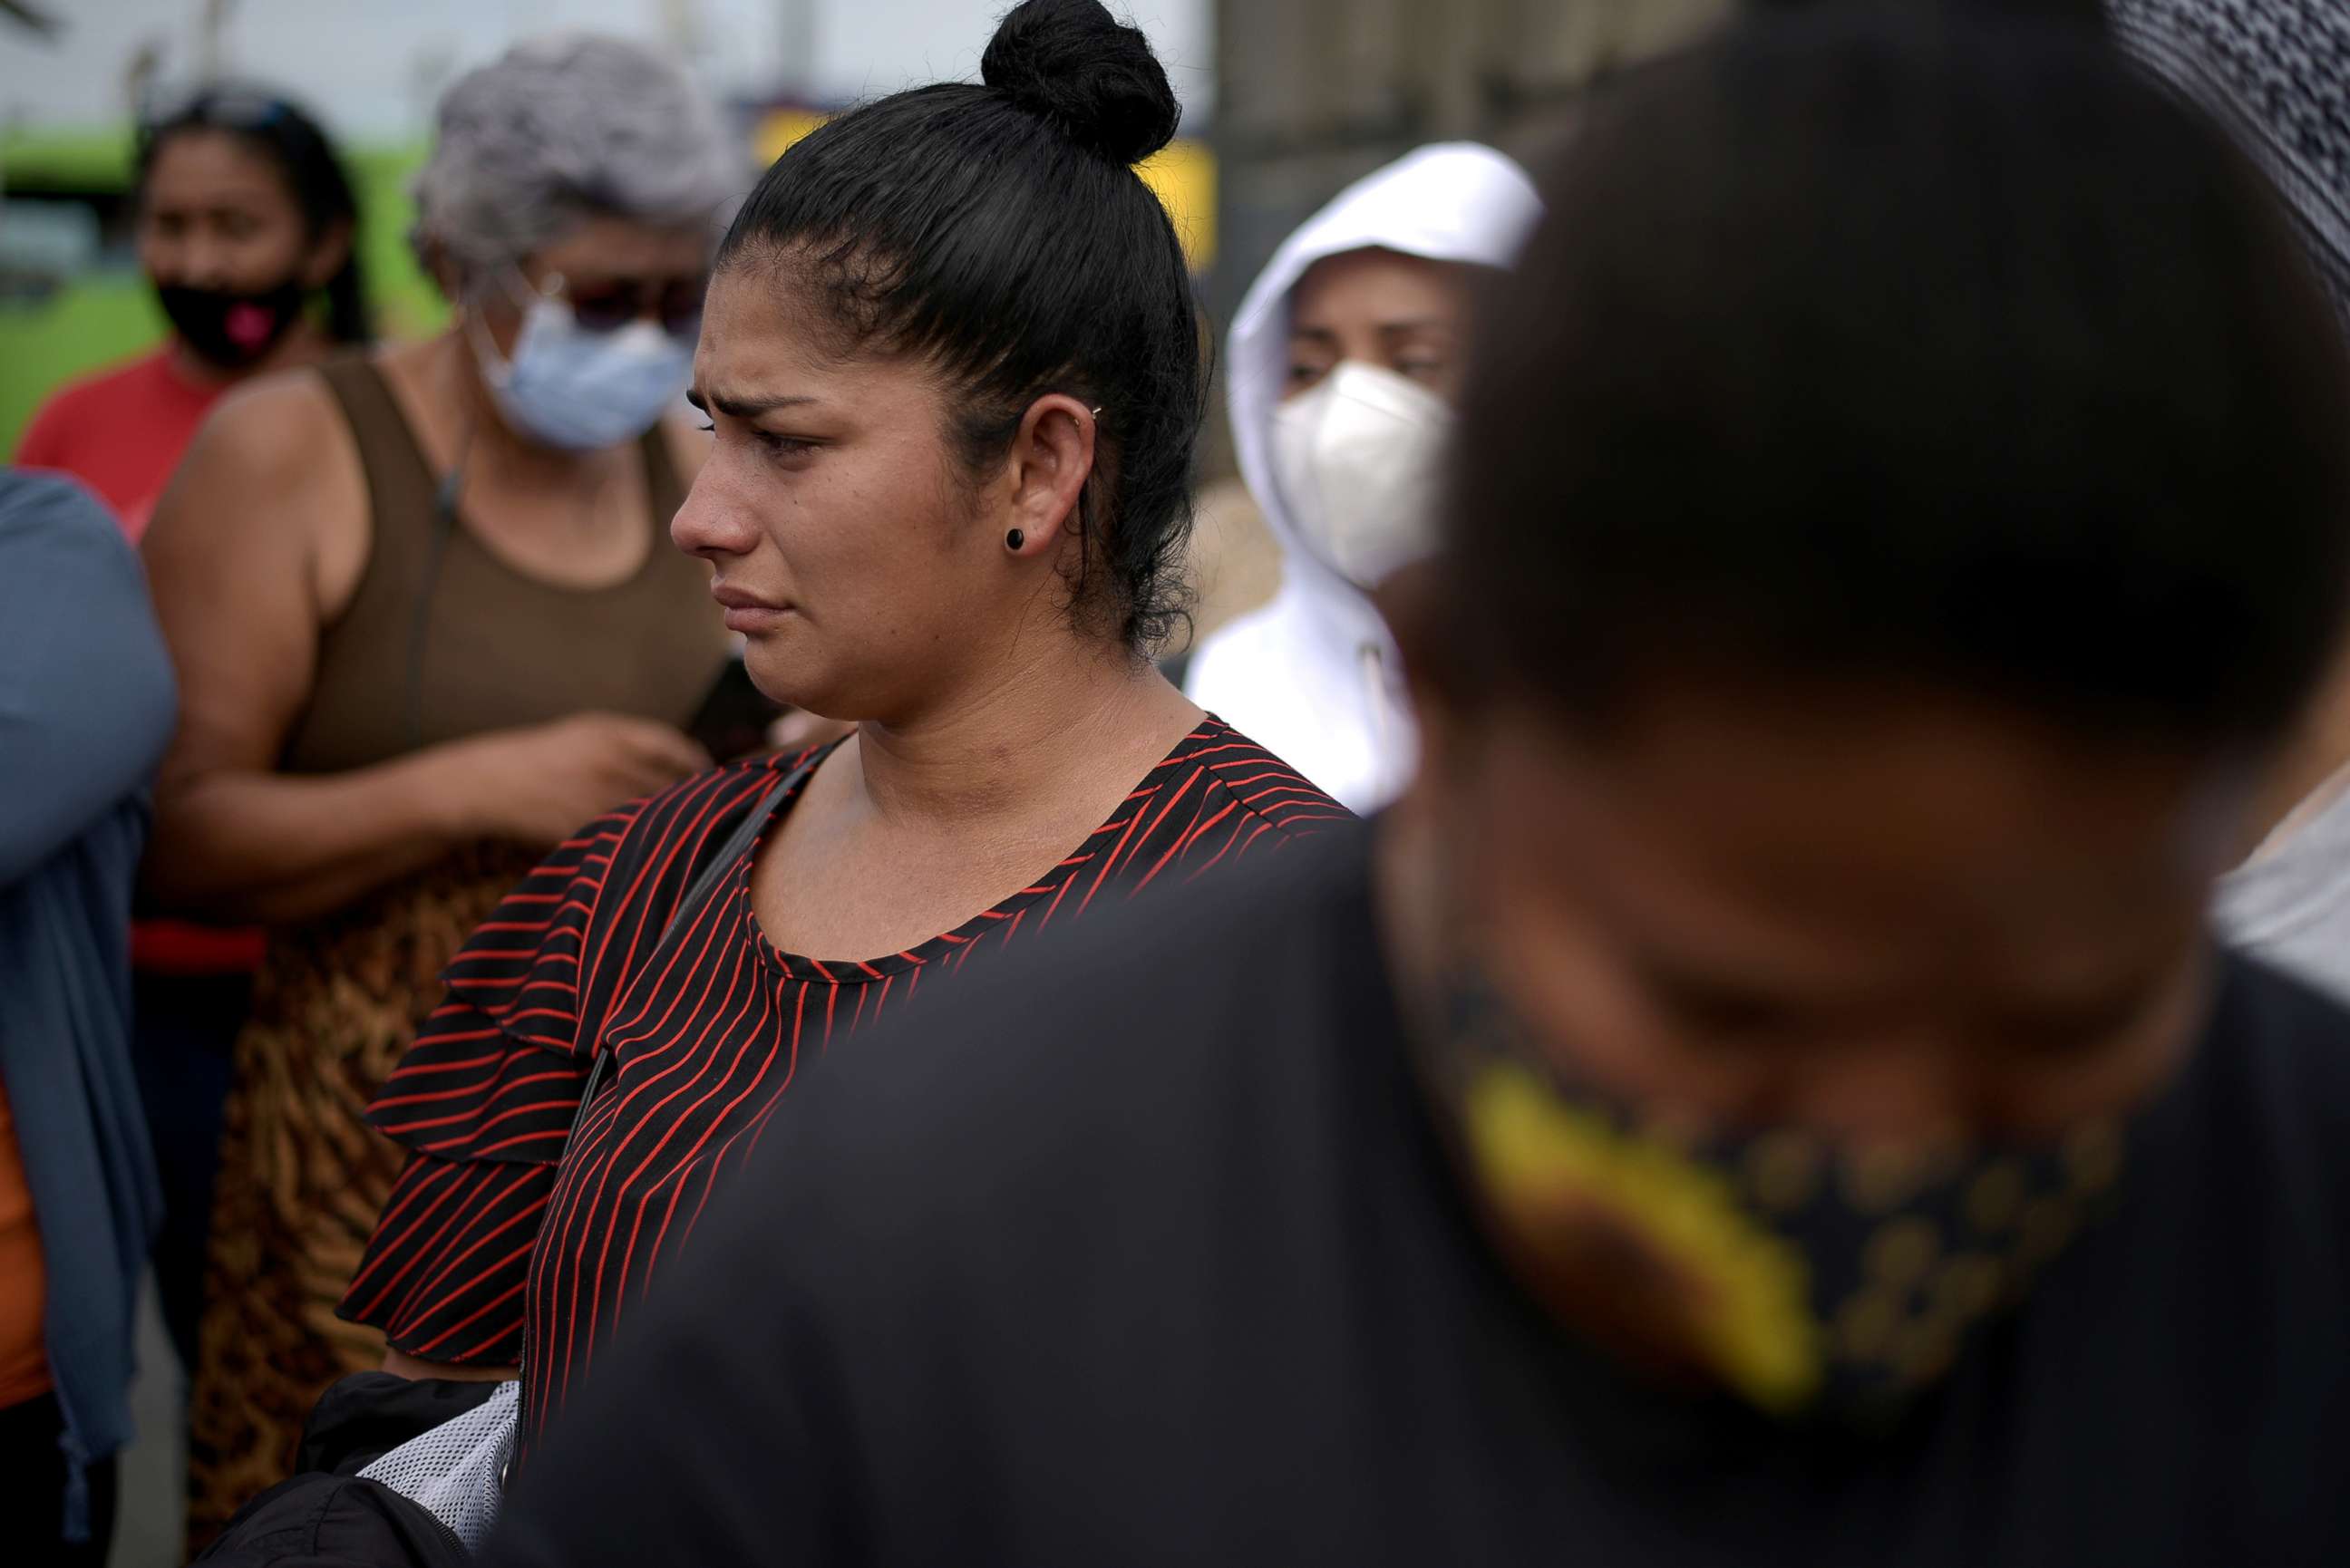 PHOTO: Family members of inmates gather outside a prison where inmates were killed during a riot that the government described as a concerted action by criminal organisations, in Guayaquil, Ecuador on Feb. 25, 2021.